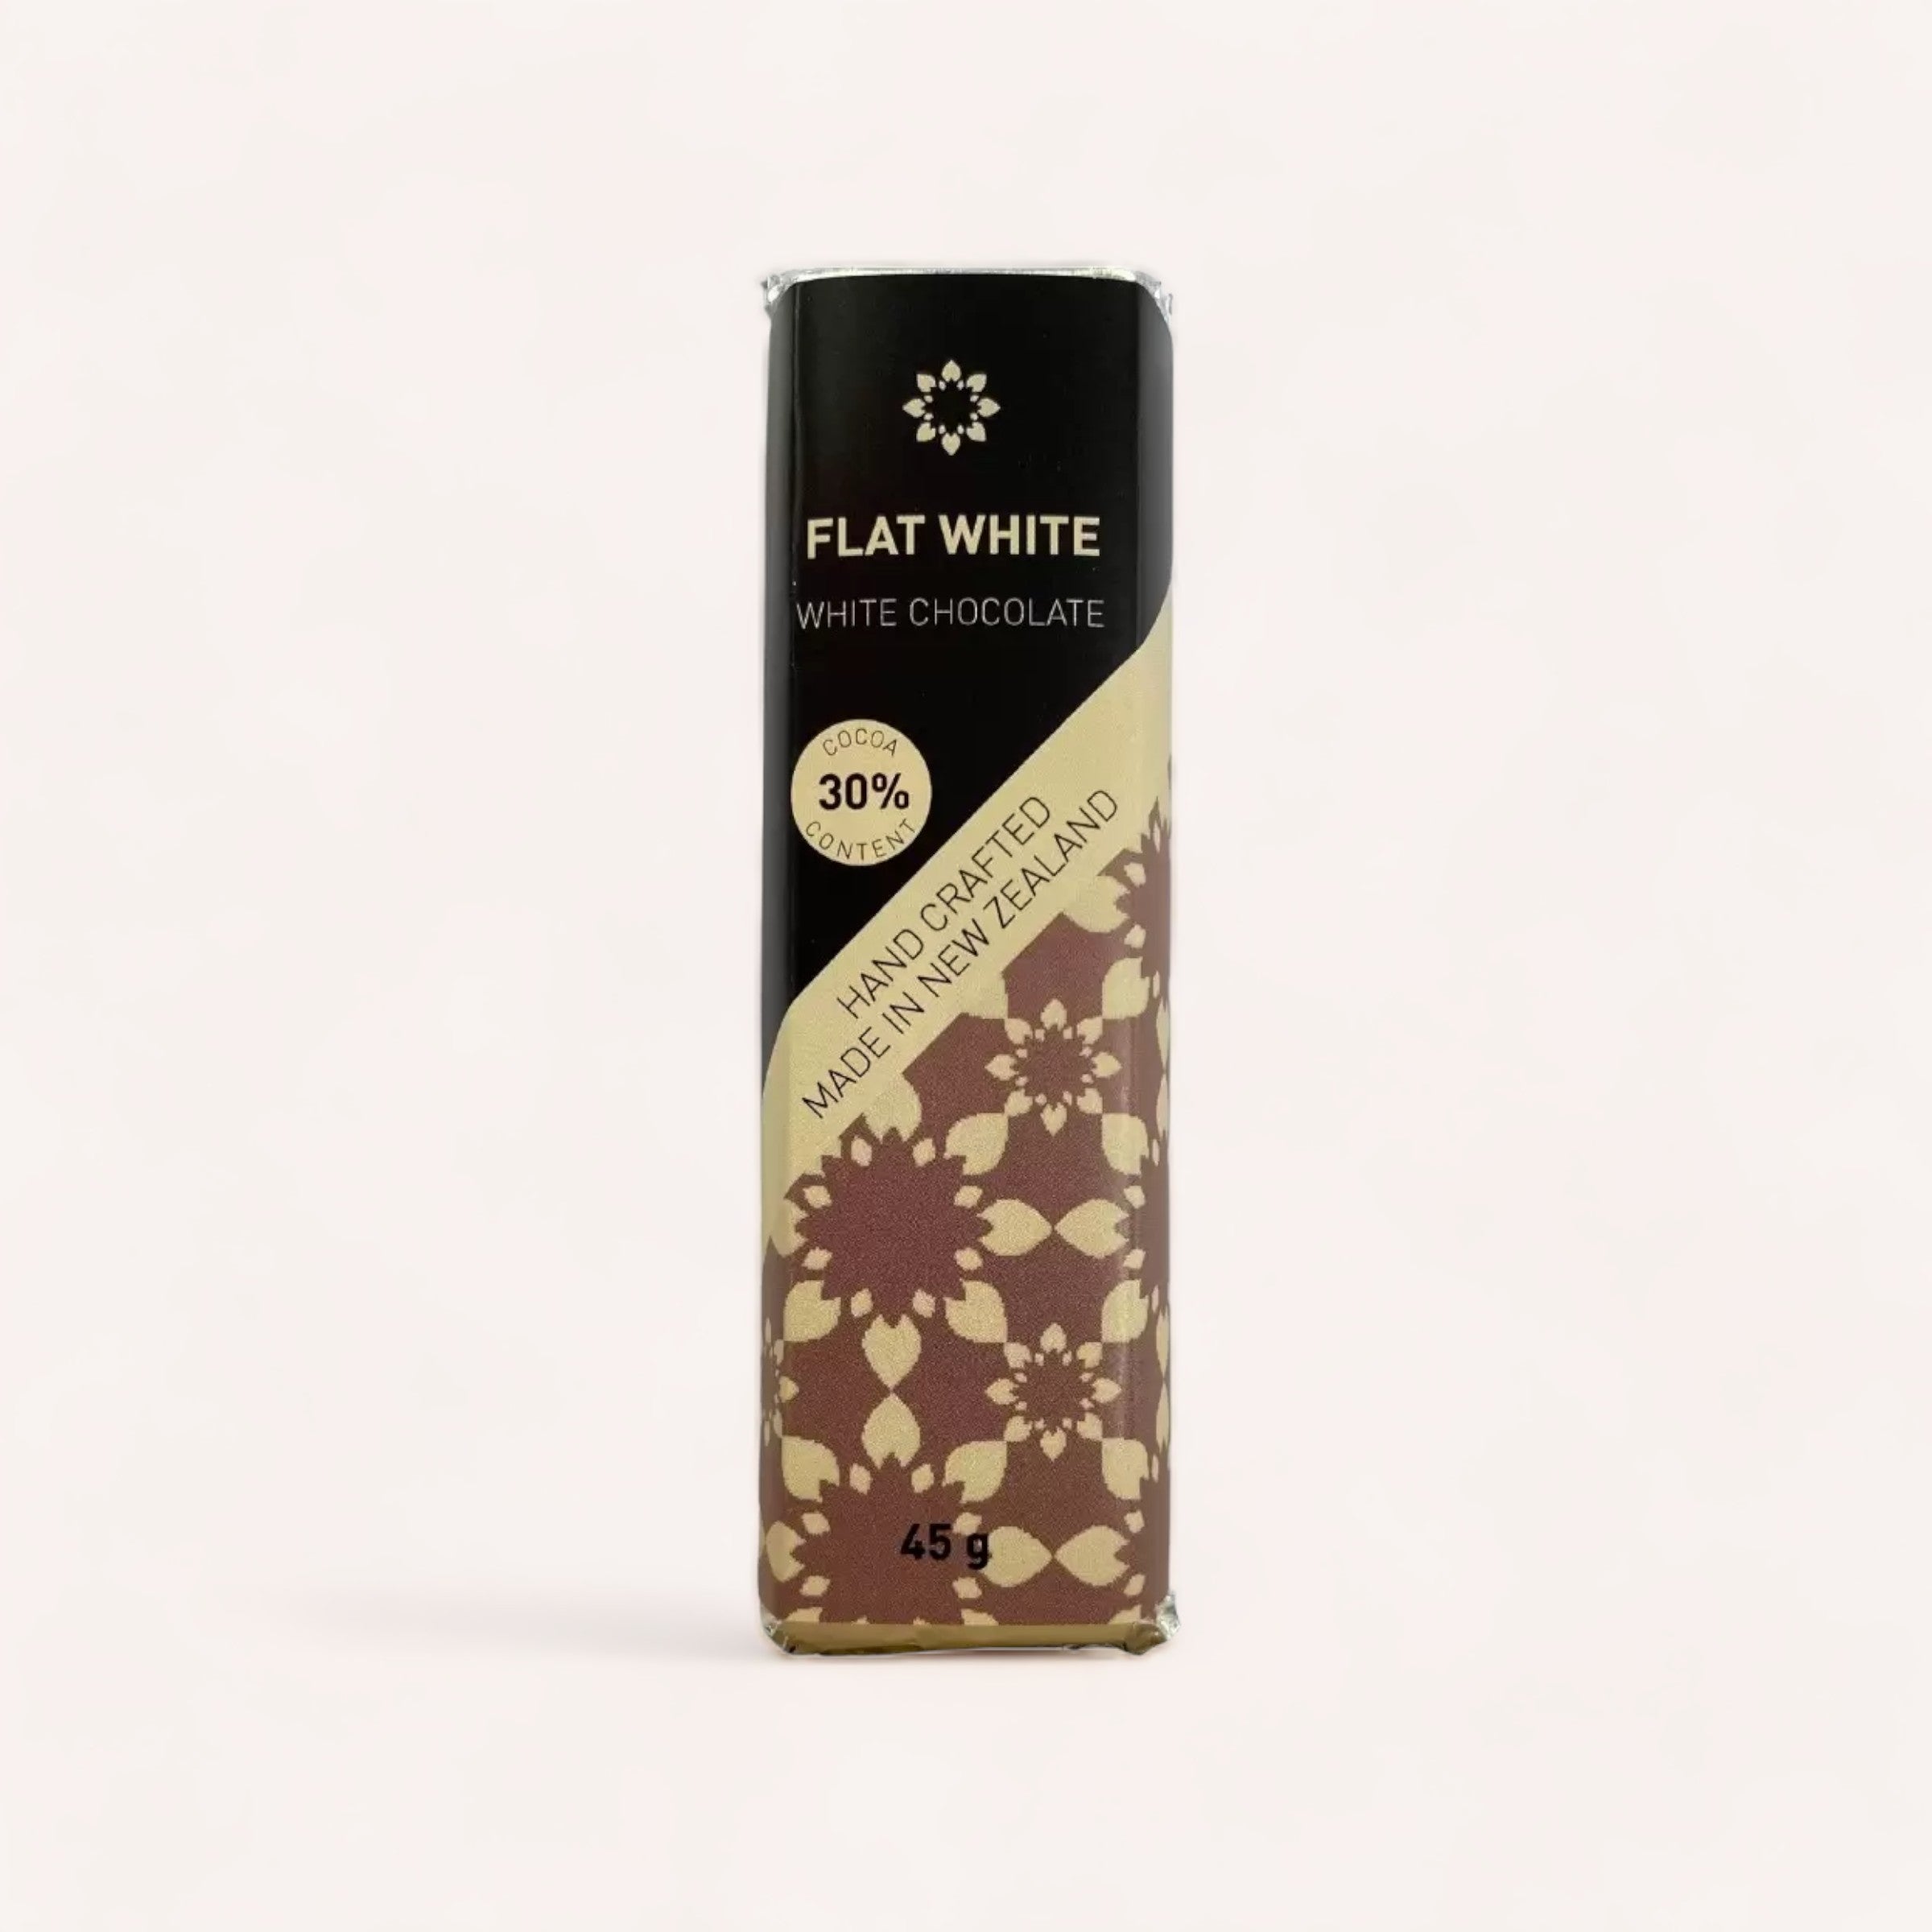 A 45g multibuy Flat White Chocolate bar by Chocolate Traders with 30% cocoa, elegantly wrapped in paper with a floral design, handcrafted in New Zealand.